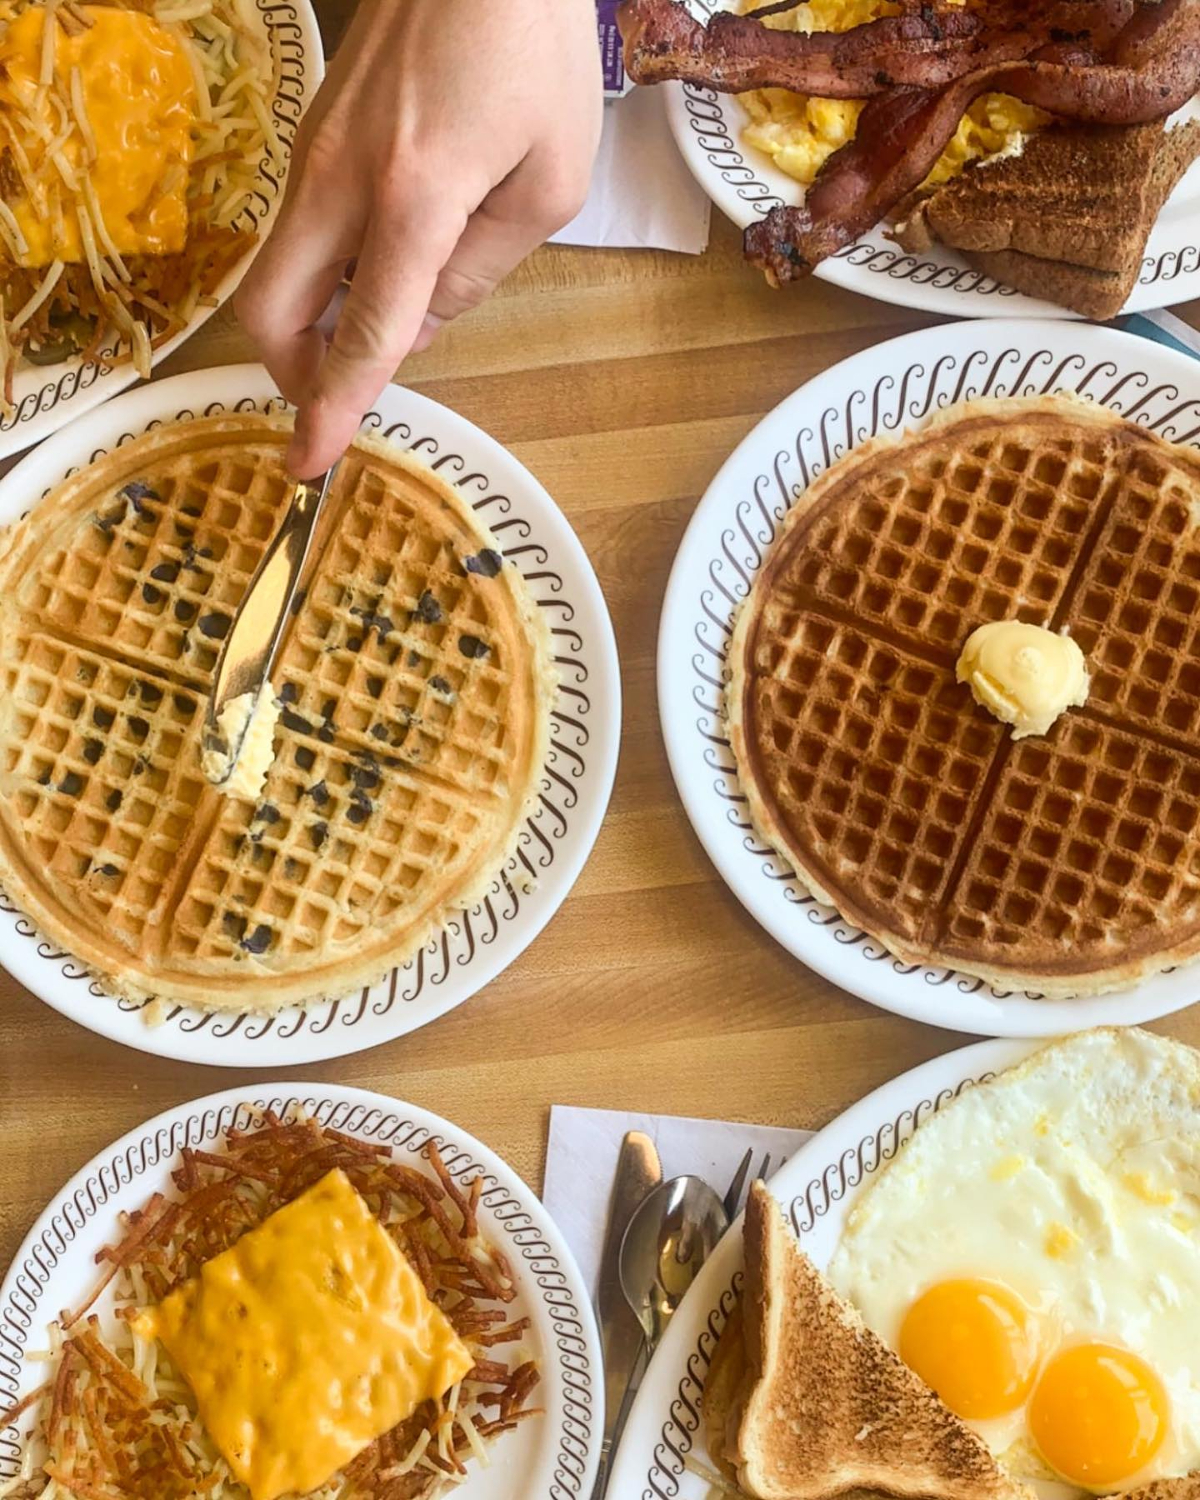 https://whatnowcolumbus.com/wp-content/uploads/sites/34/2023/06/Waffle-House-Files-Plans-to-Open-a-New-Location-in-Centerville.jpg